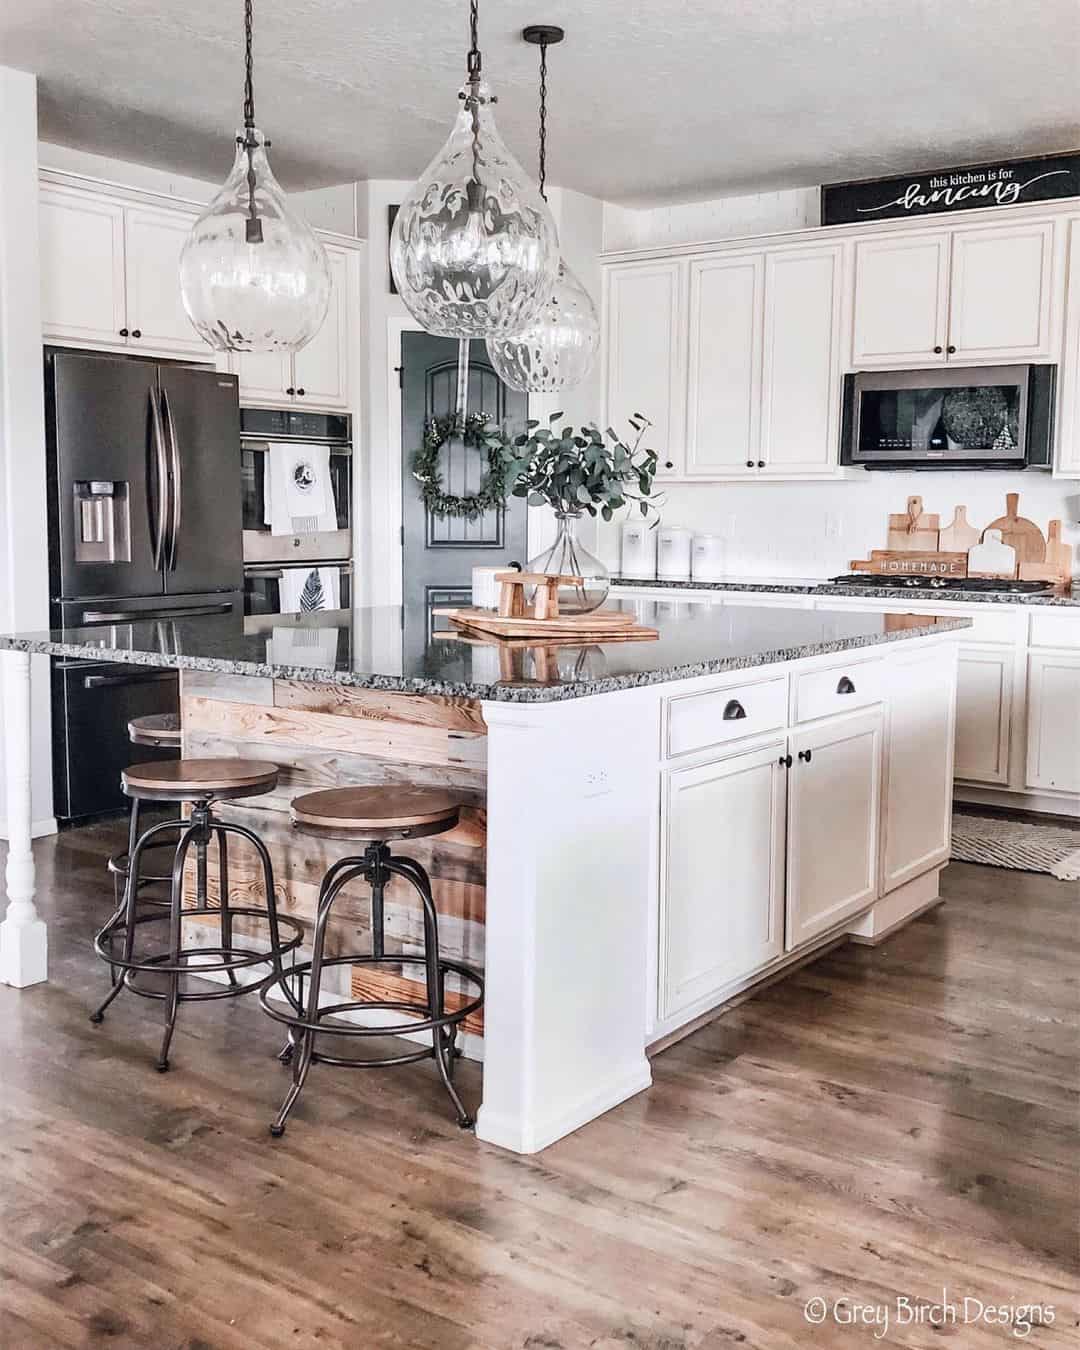 Rustic Accents in Modern White Kitchen - Soul & Lane